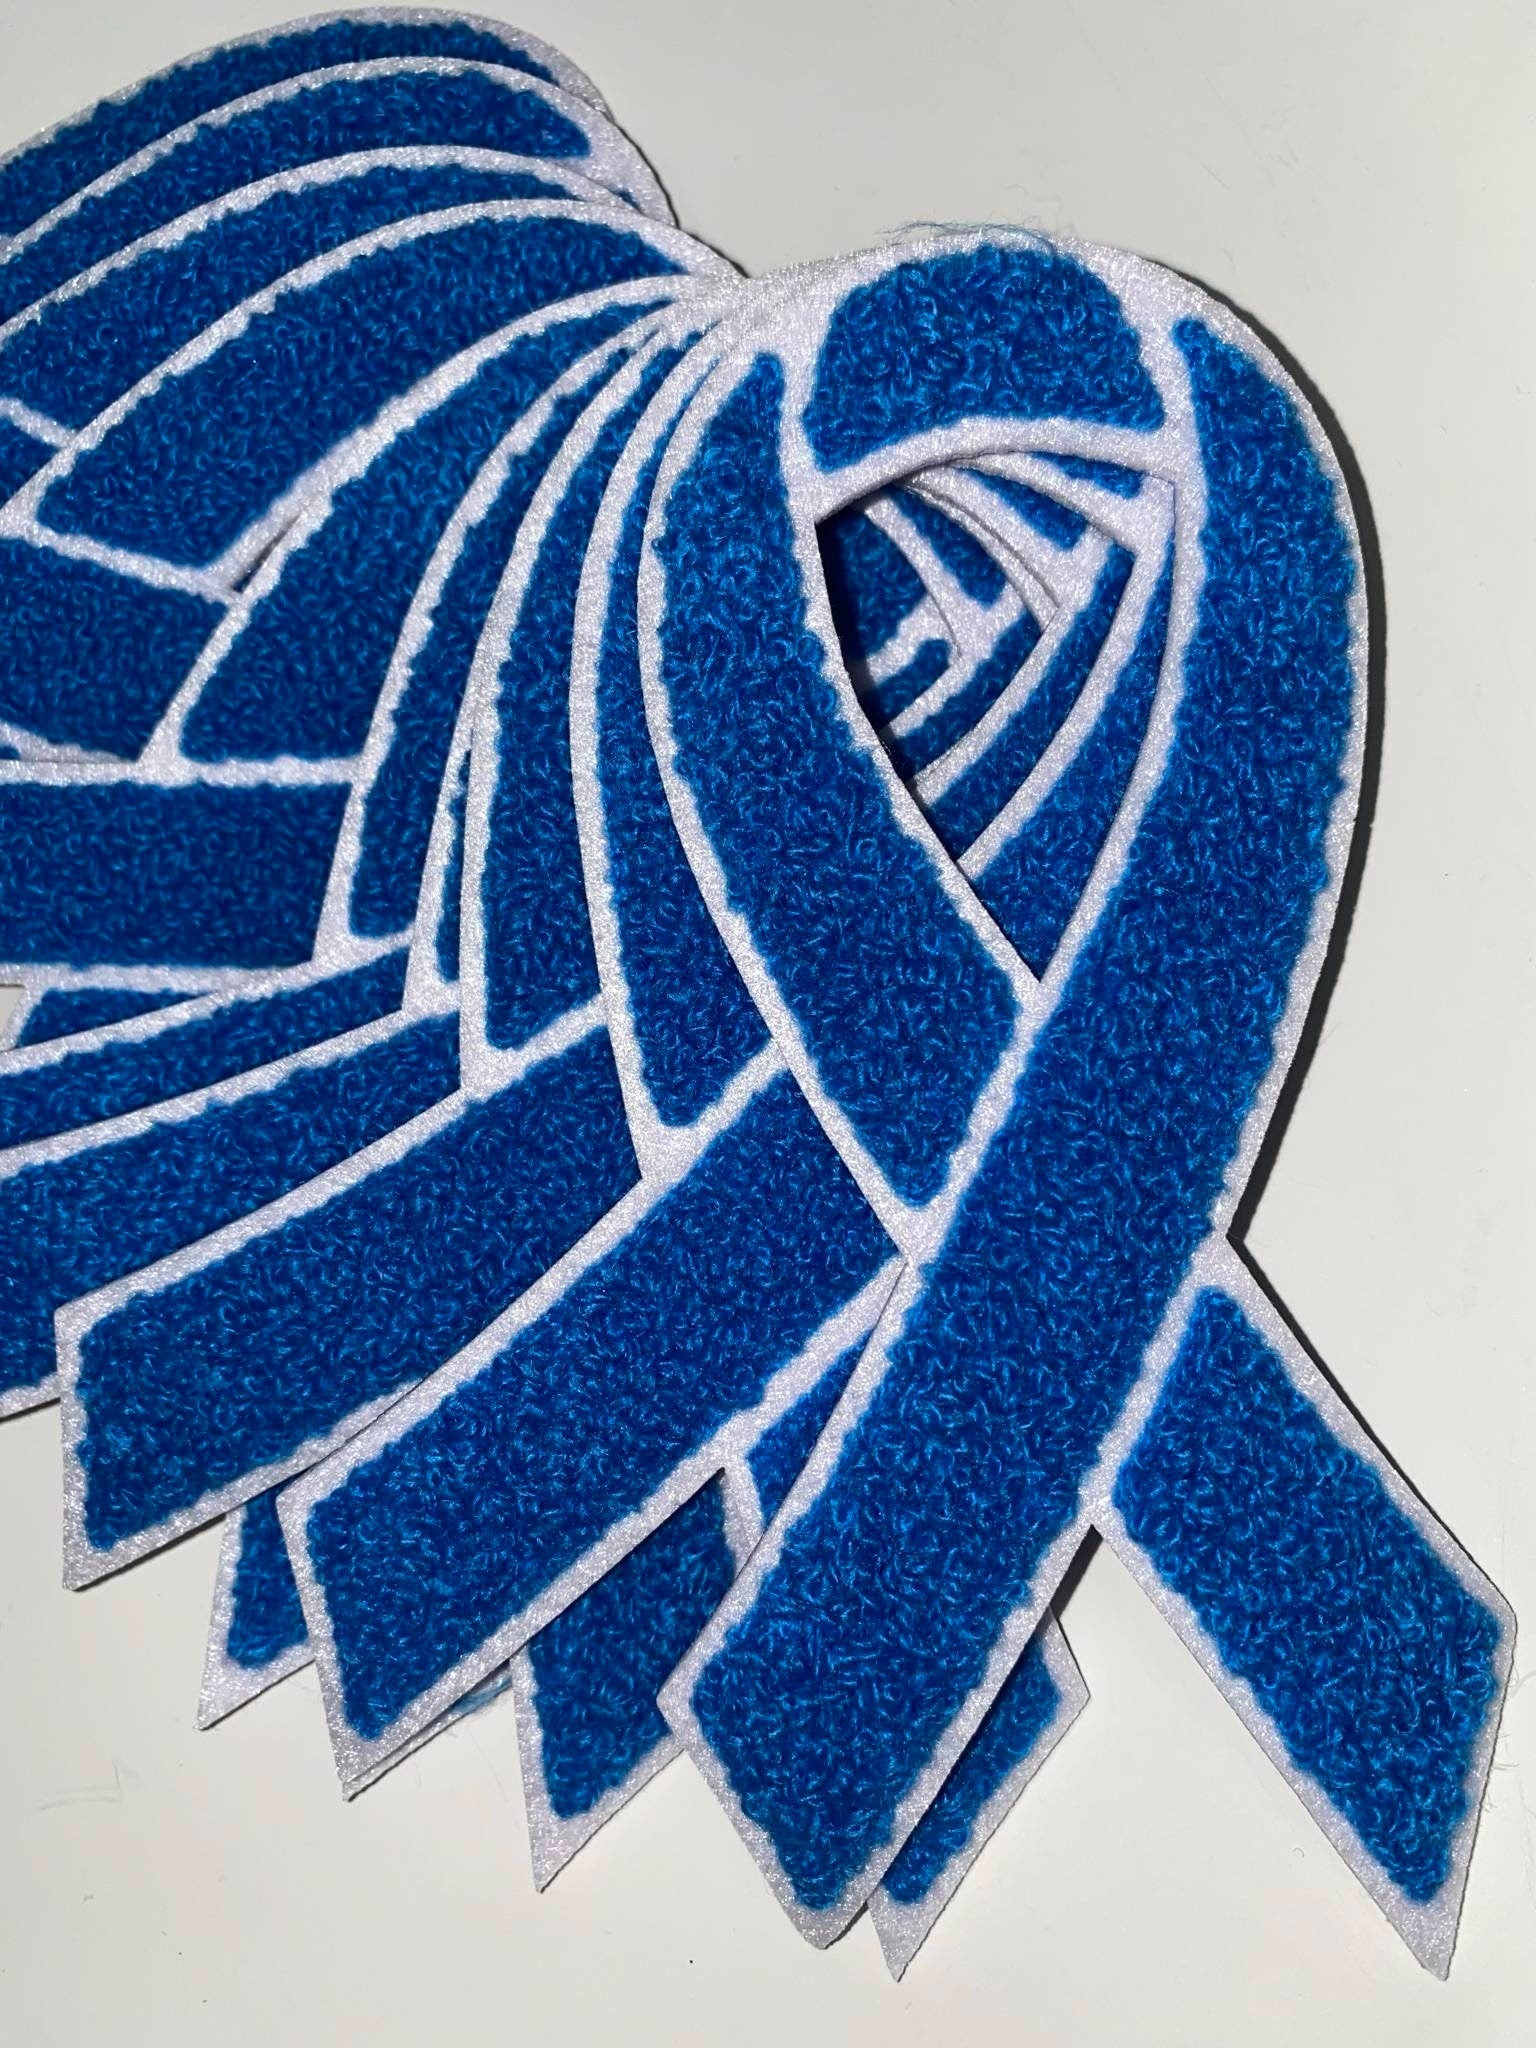 New 1-pc, Colon & Rectal Cancer "Blue Chenille" Awareness Ribbon Patch, 5.5" Iron or Sew-on, Cancer  Patch/Applique, Support Ribbon